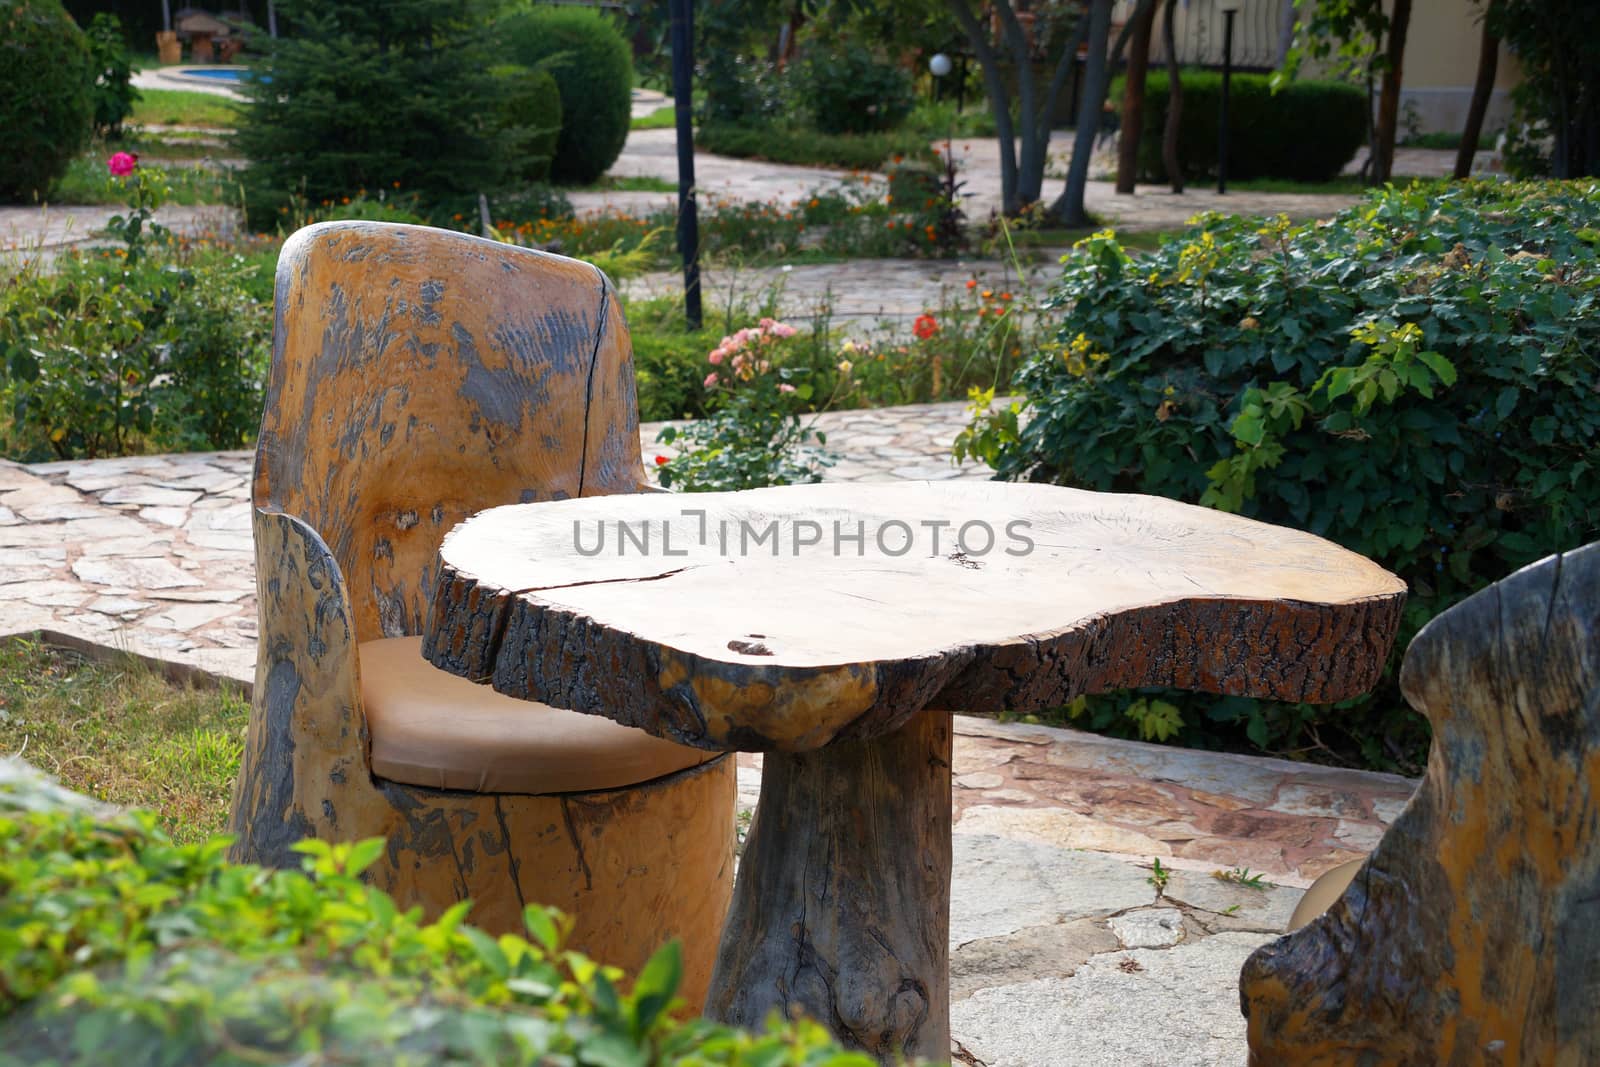 raw wood table and chairs outside